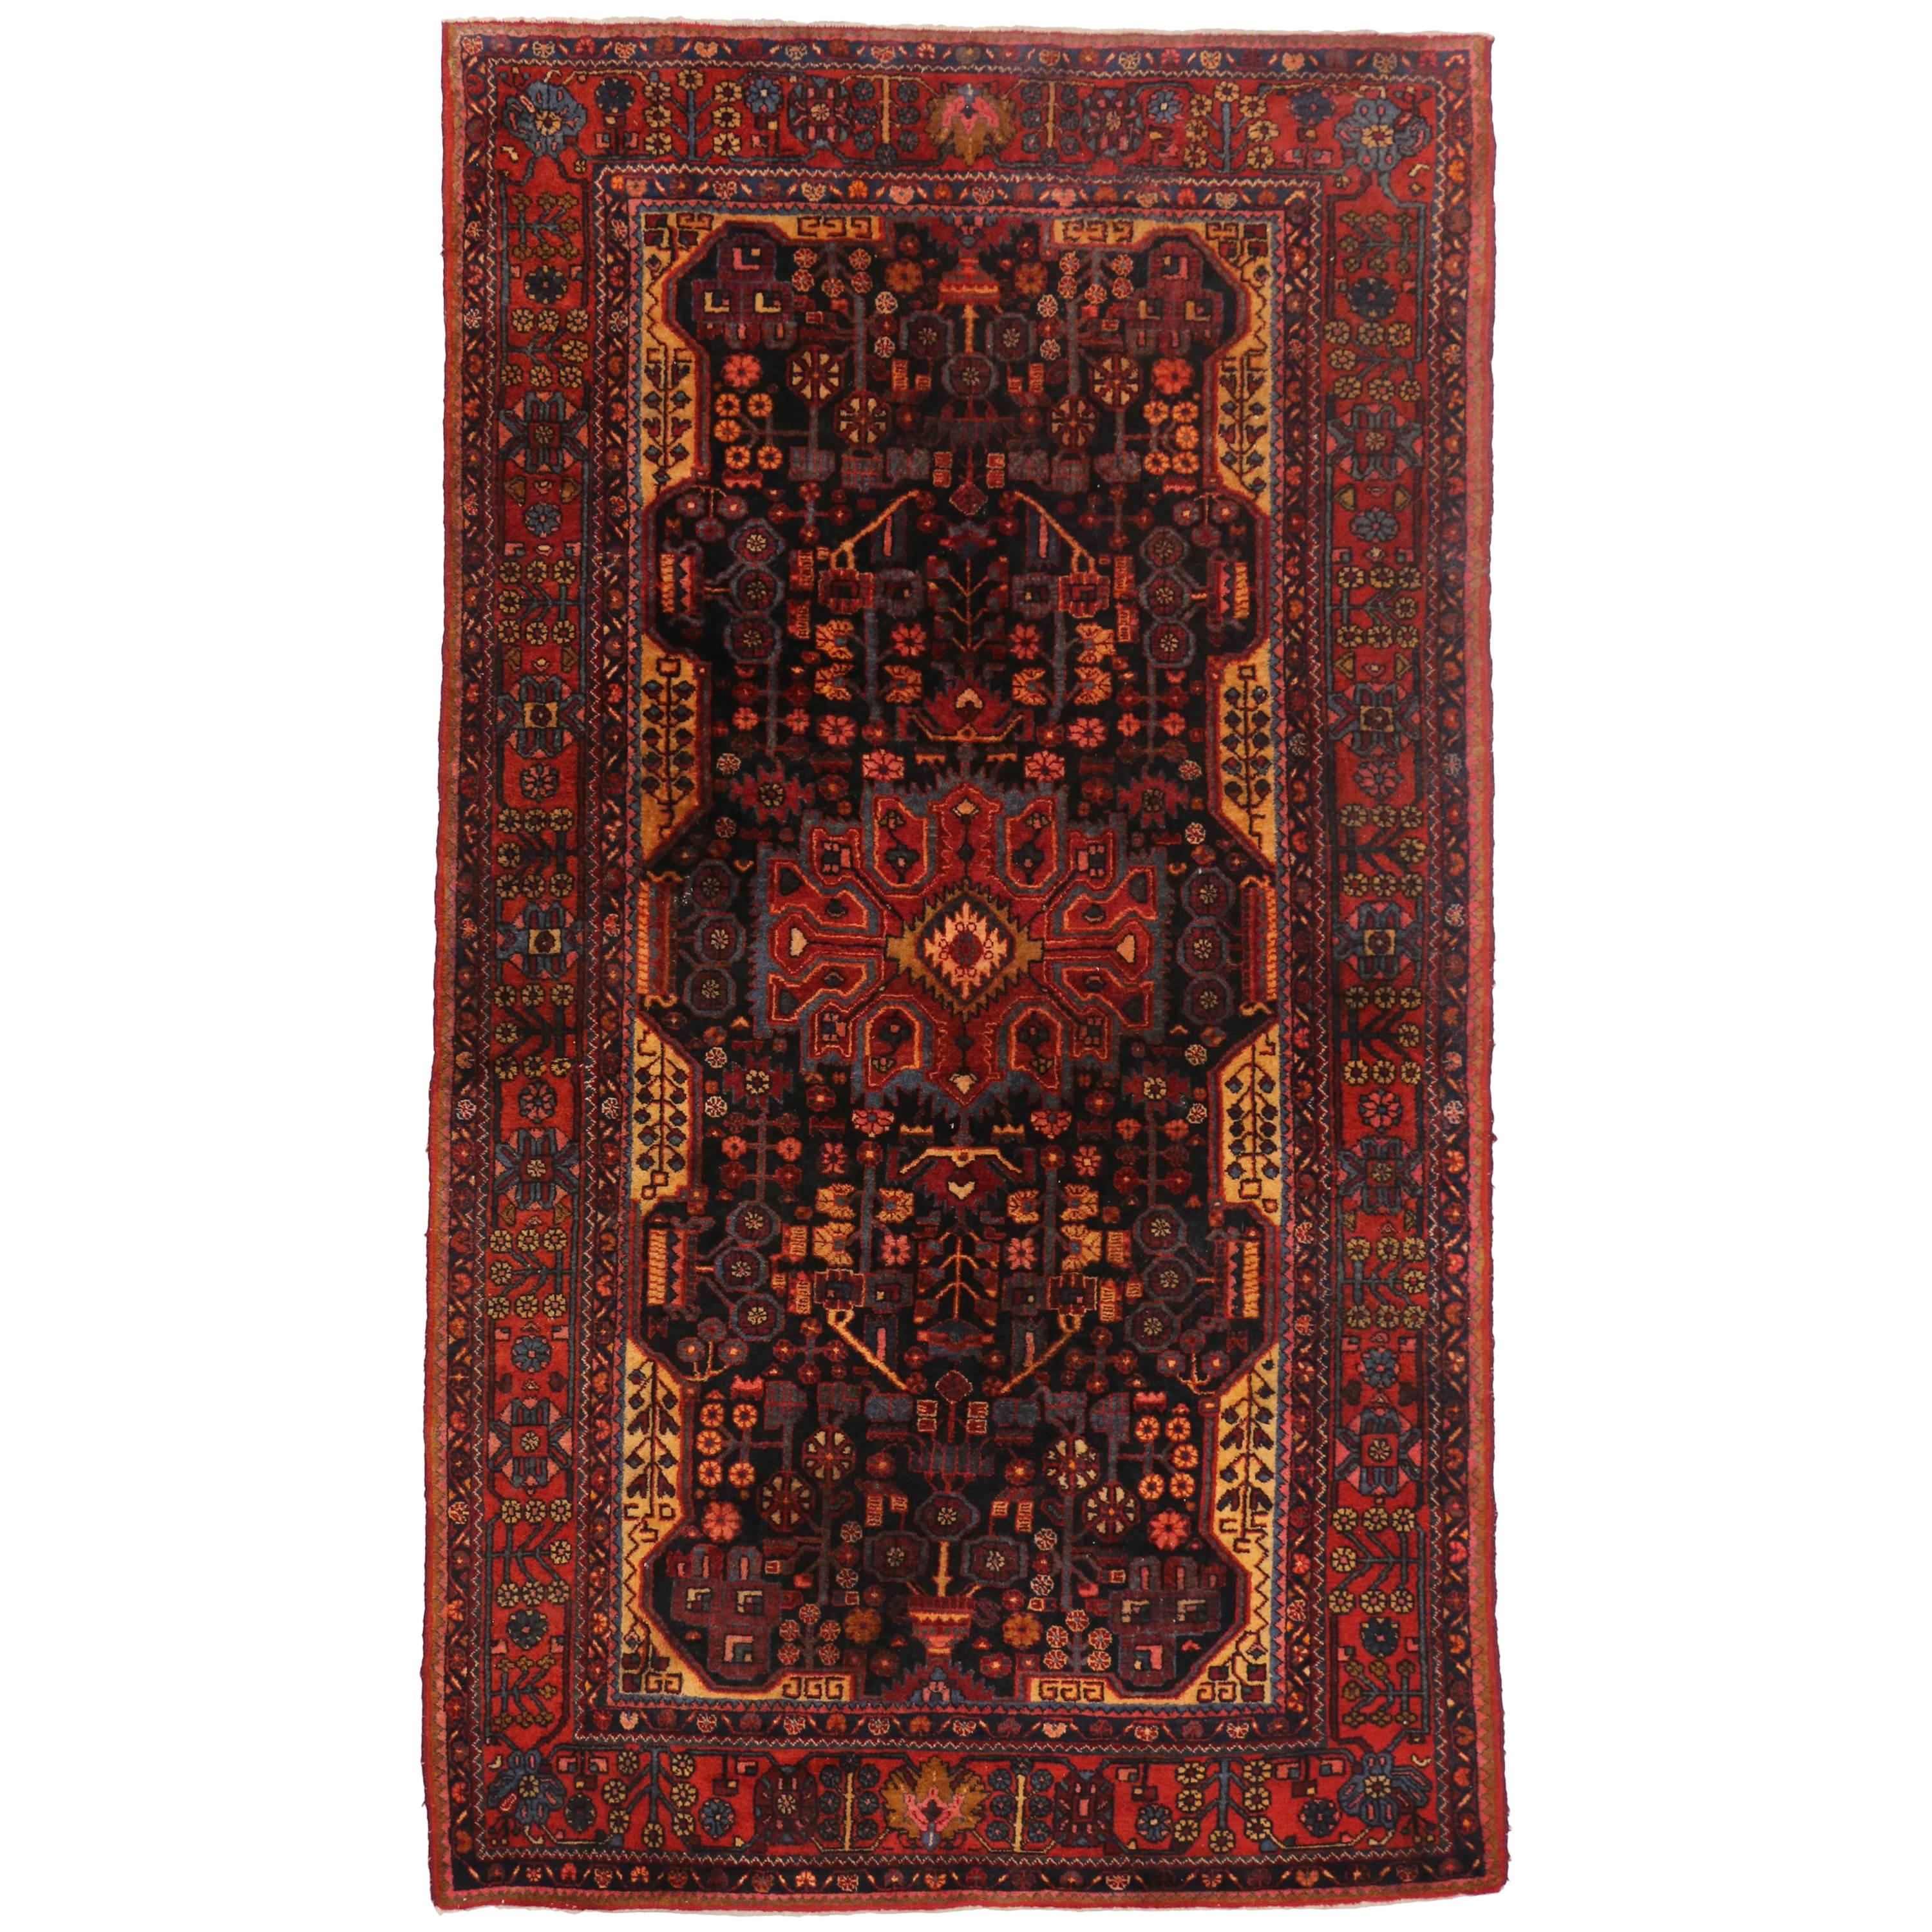 Antique Persian Hamadan Gallery Rug with Modern Tribal Style